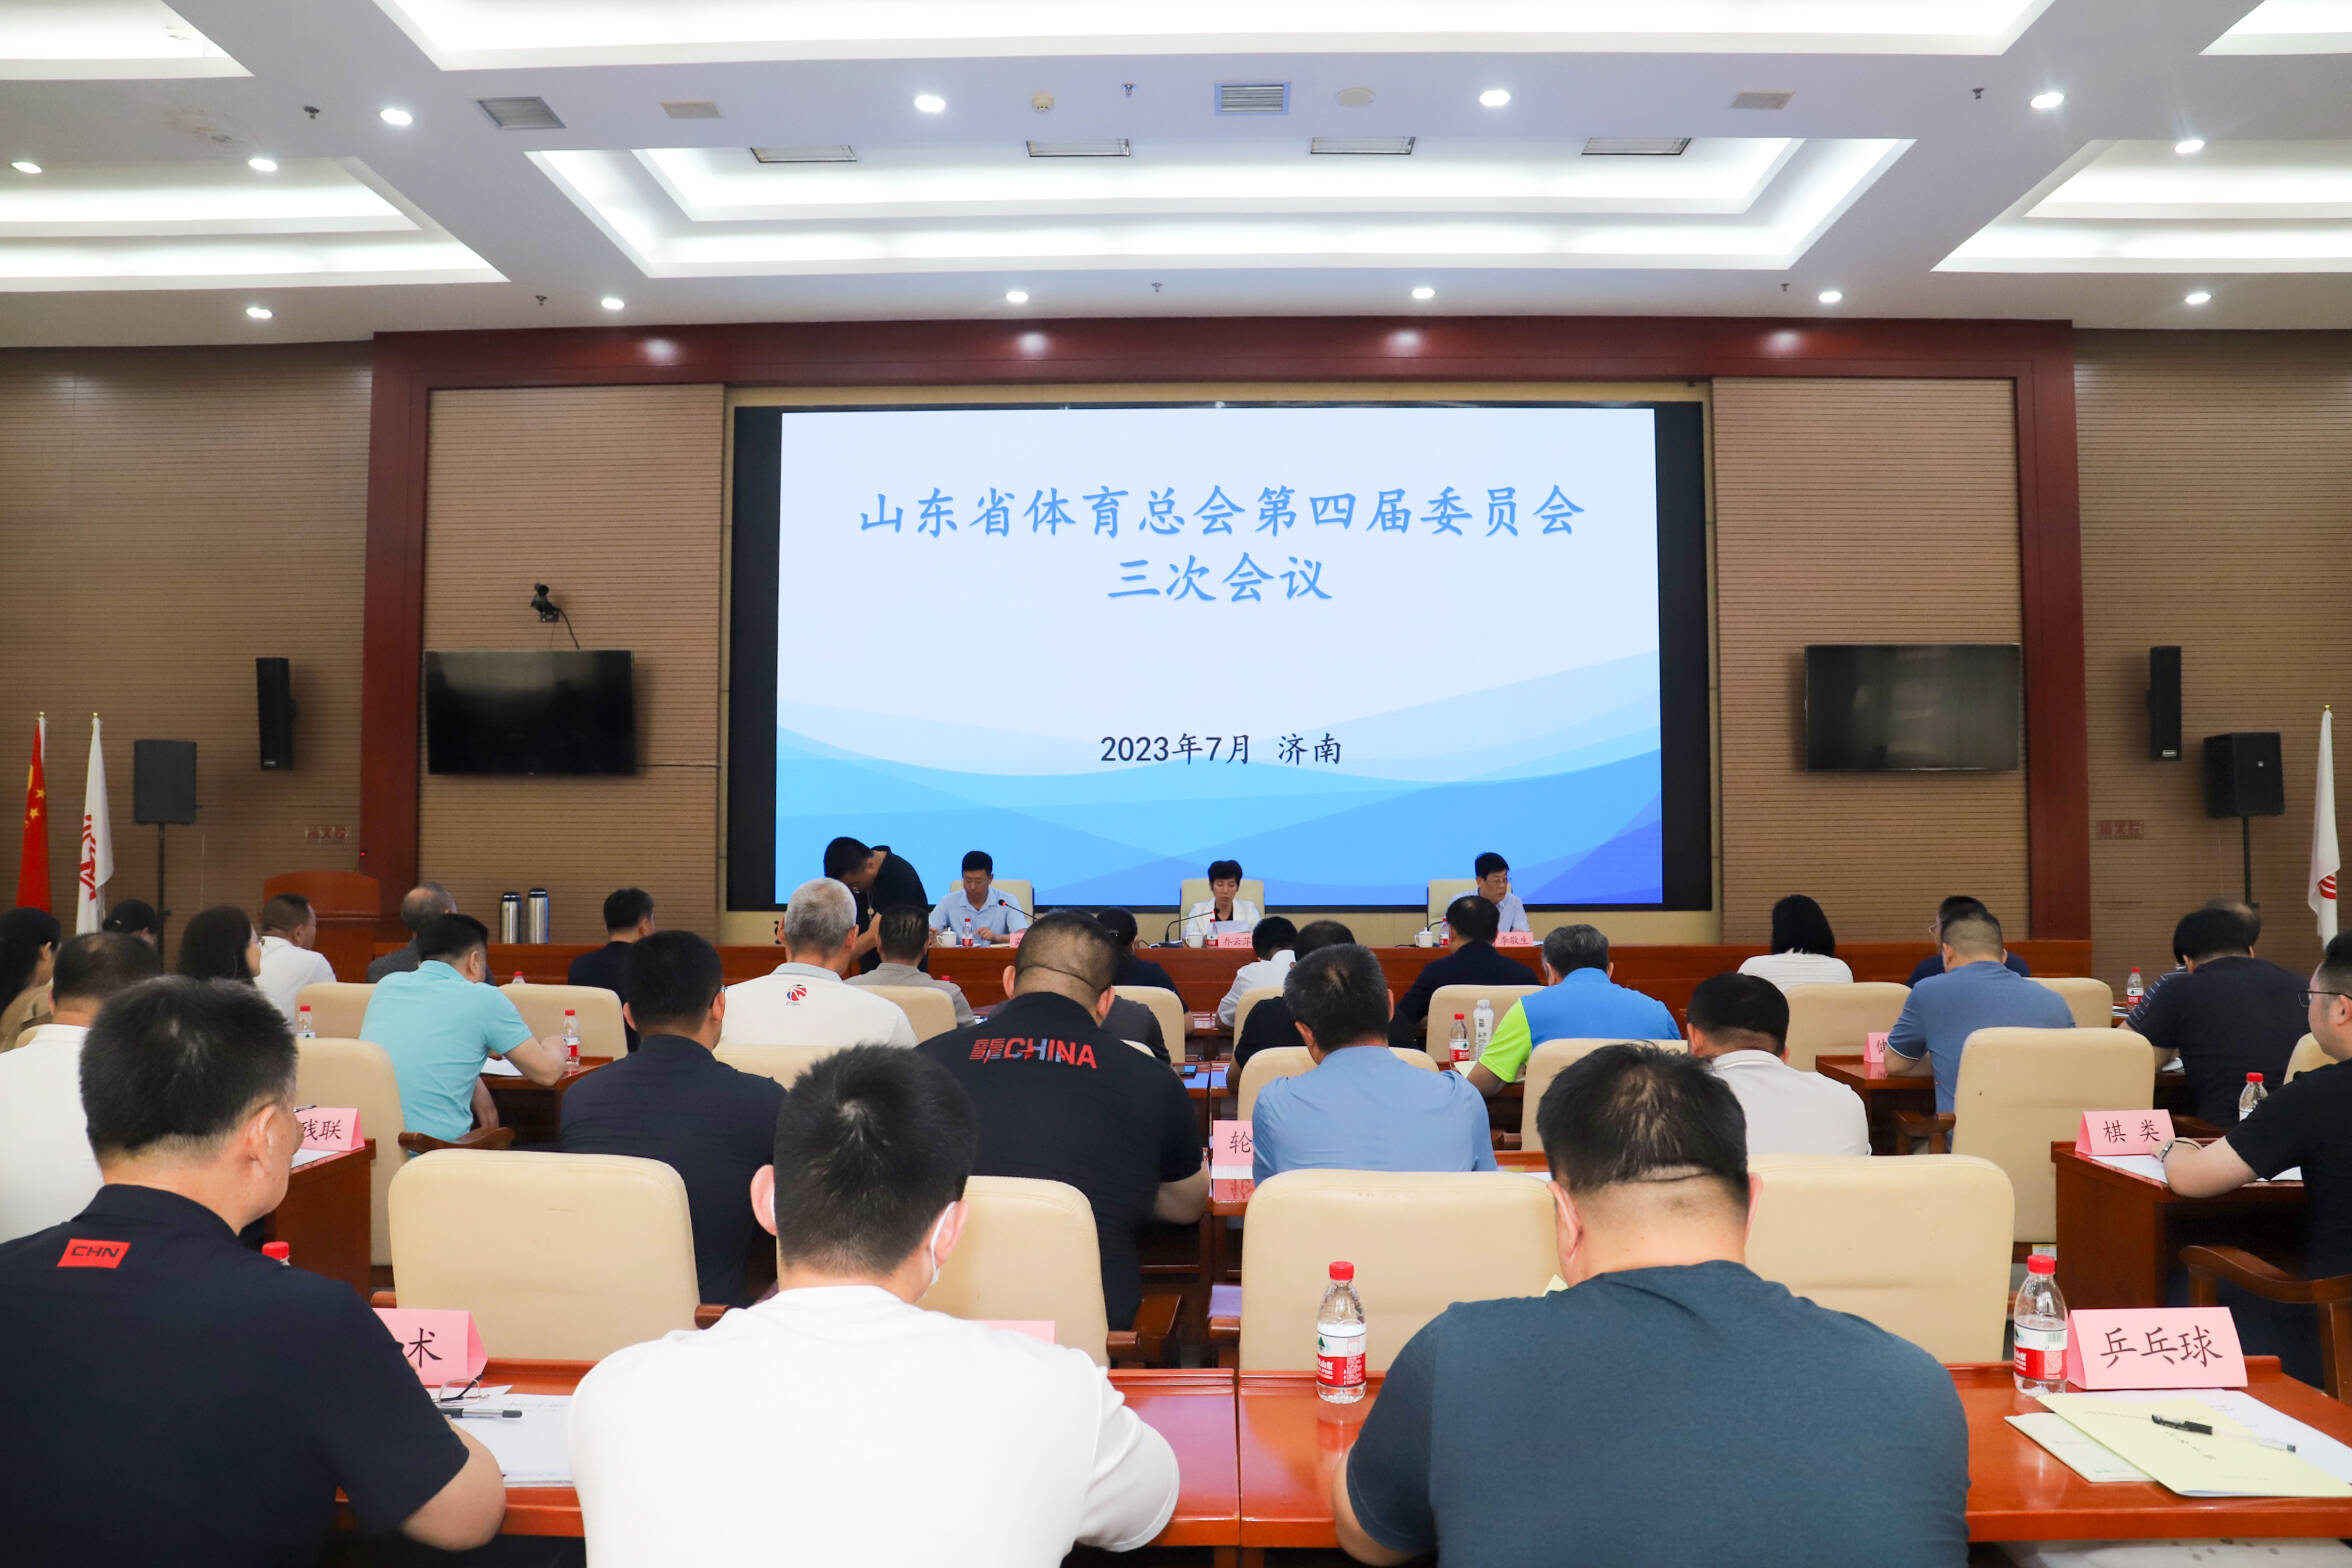 The Guangming Supervision Bureau of the Shenzhen Market Supervision and Administration Bureau on the results of the results of the review results of the excellent quality cultivation project and the p